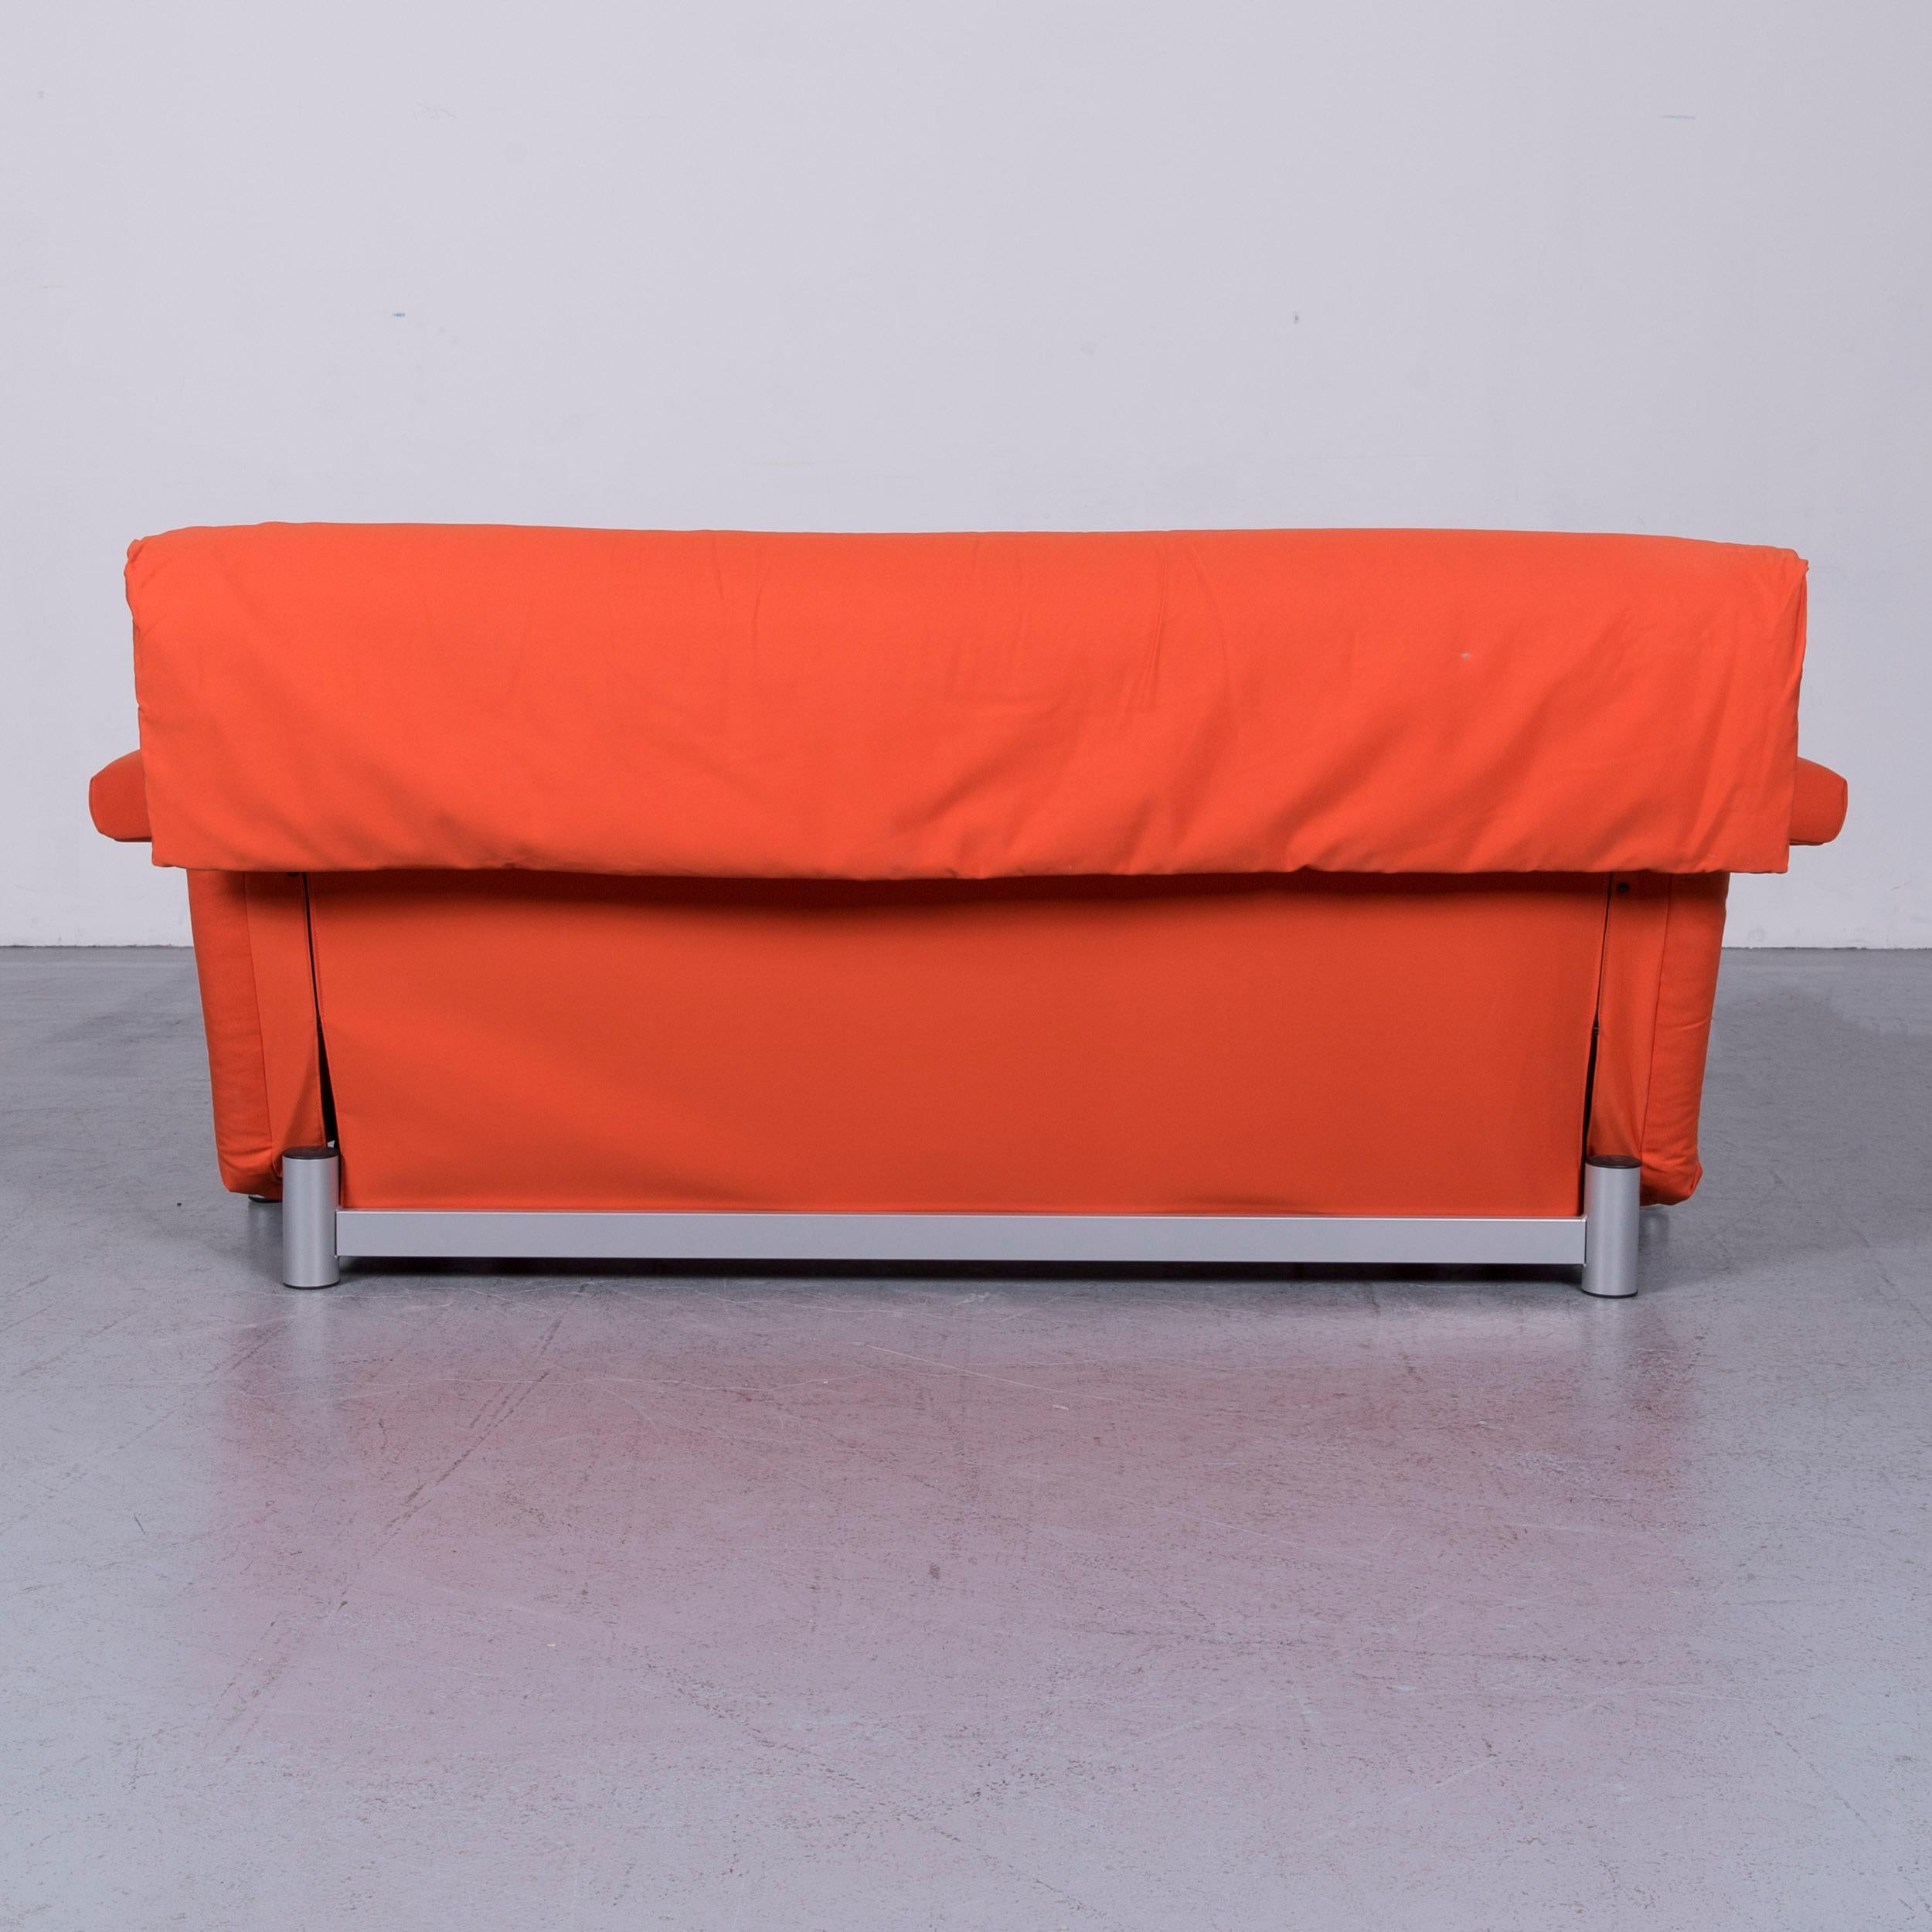 Ligne Roset Multy Fabric Sofa-Bed Orange Two-Seat Couch Sleep Function 6